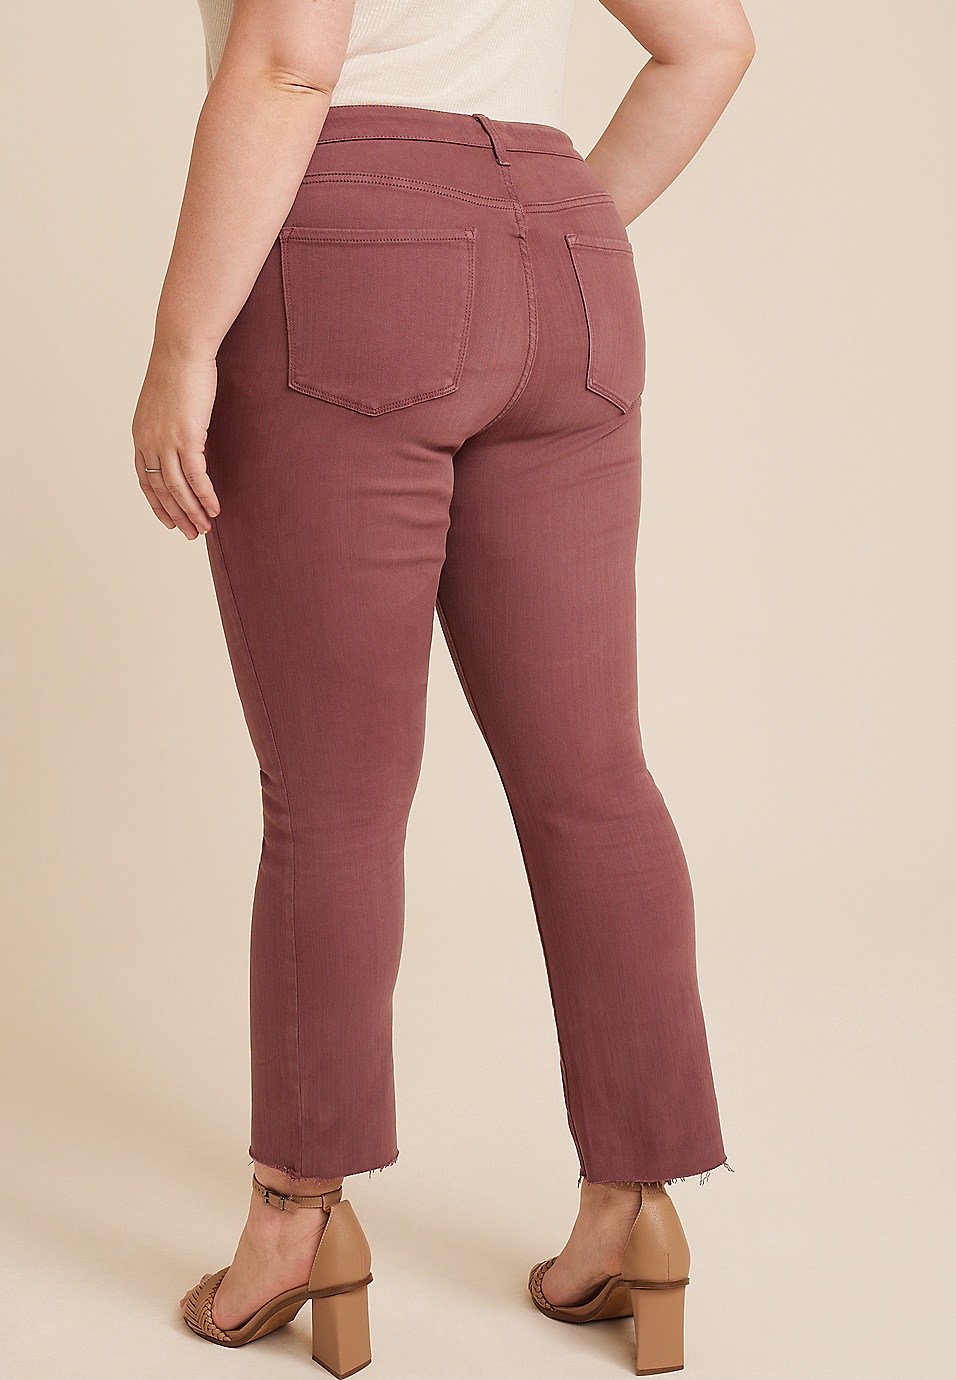 Plus Size m jeans by maurices™ High Rise Super Skinny Jean